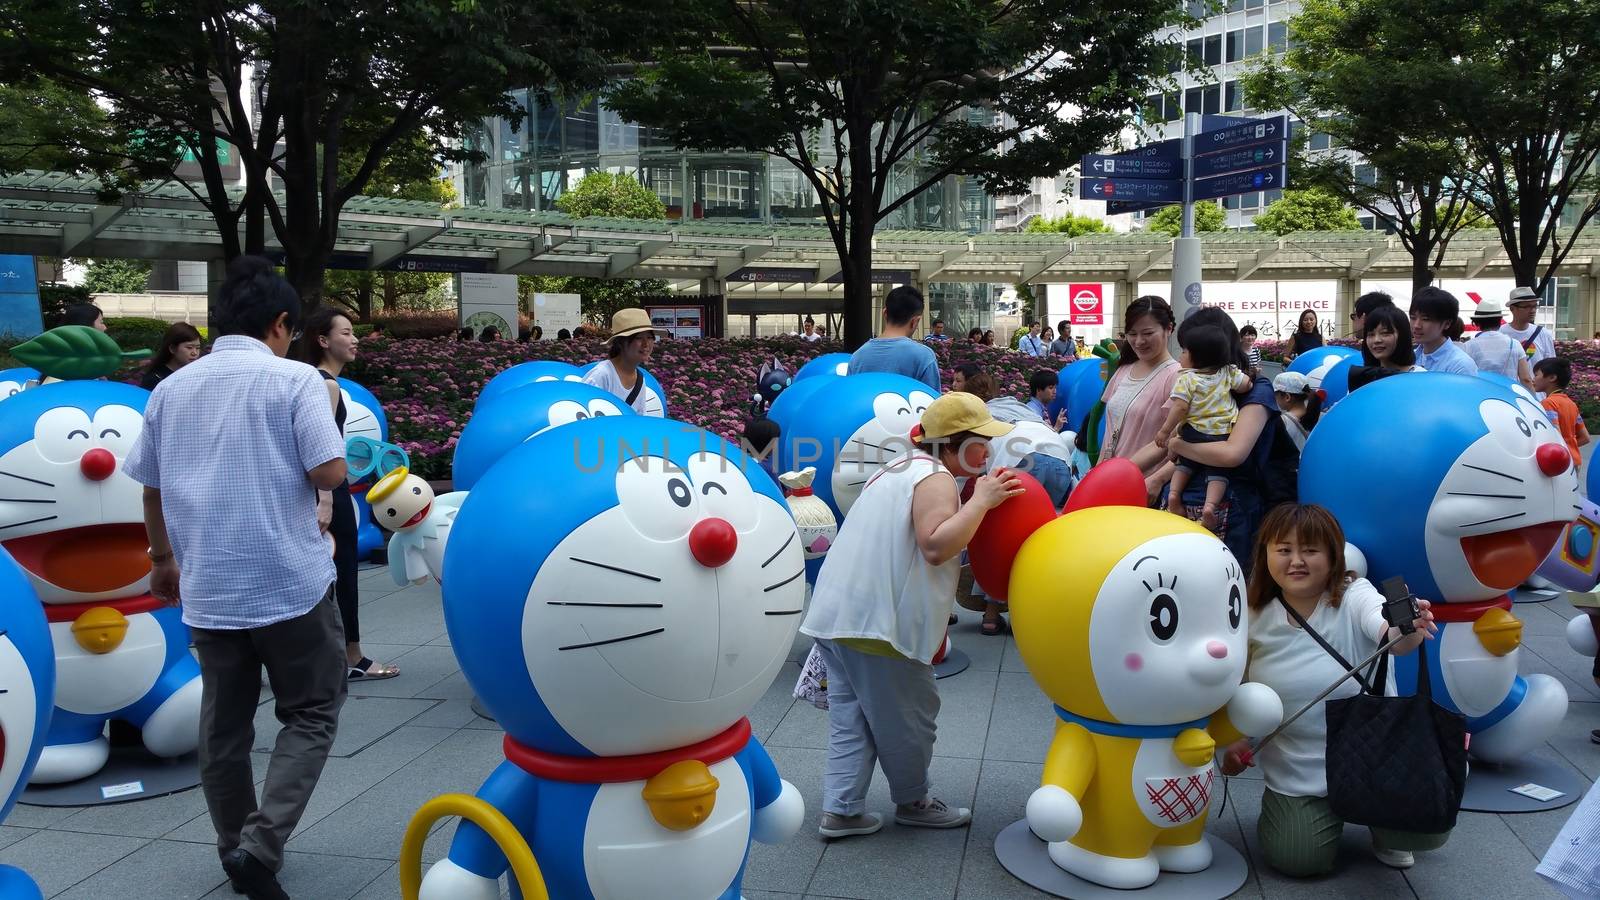 Tokyo, Japan - July 18, 2016: People and their family are enjoy visiting the Doraemon model exhibition held at Roppongi neighborhood, Tokyo. Two middle-aged women are taking themselves a photography with the Doraemon model.